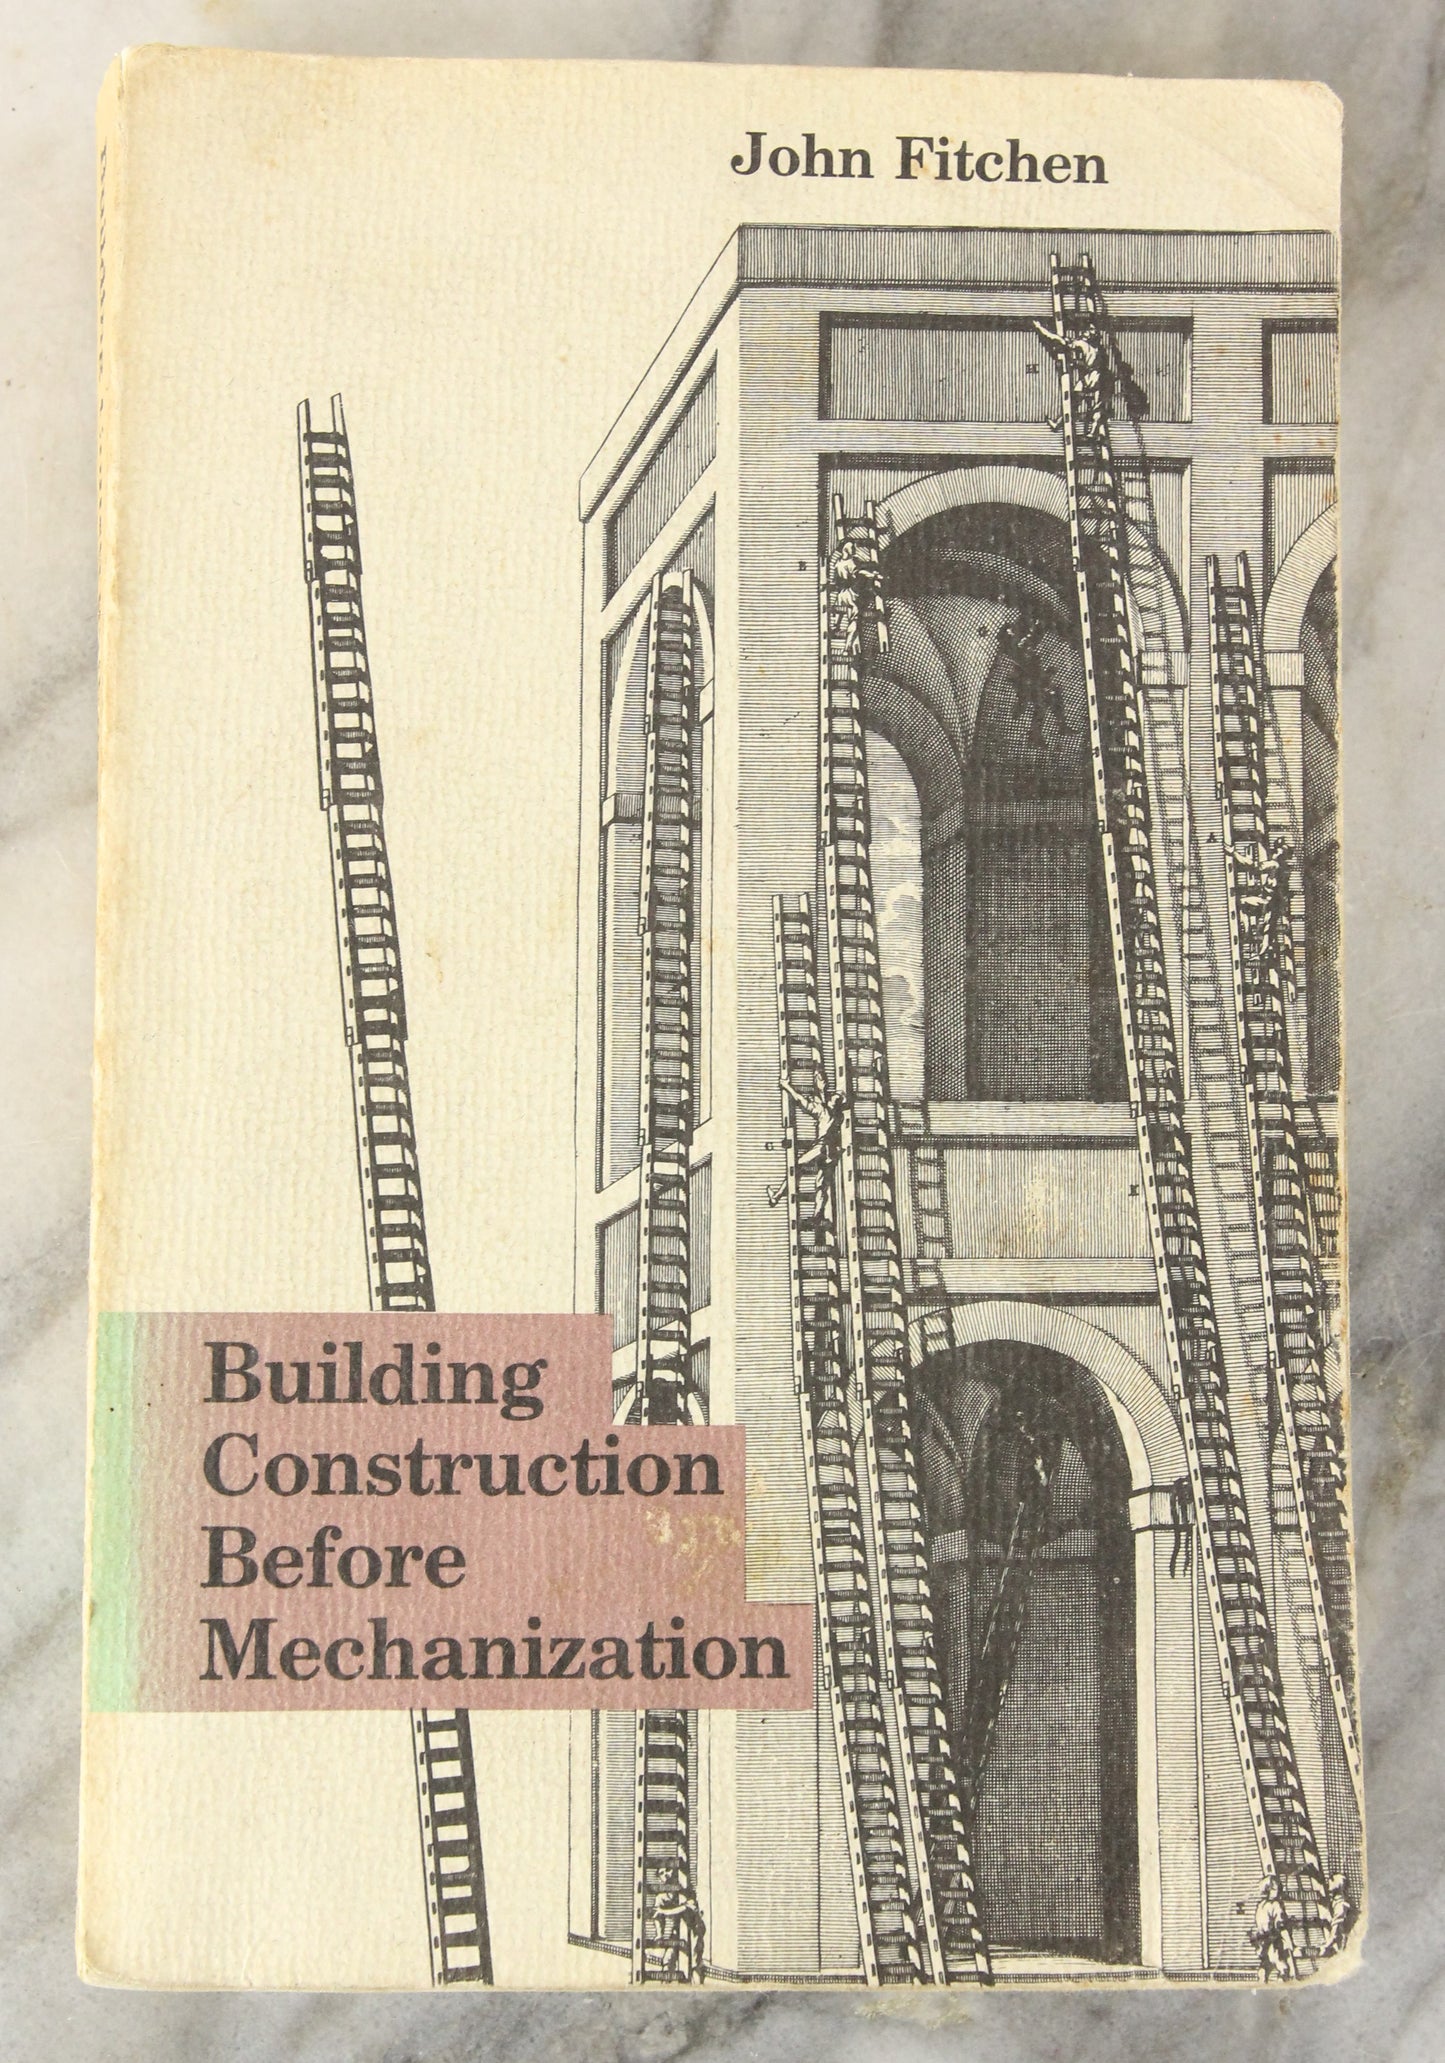 Building Construction Before Mechanization by John Fitchen, Copyright 1992